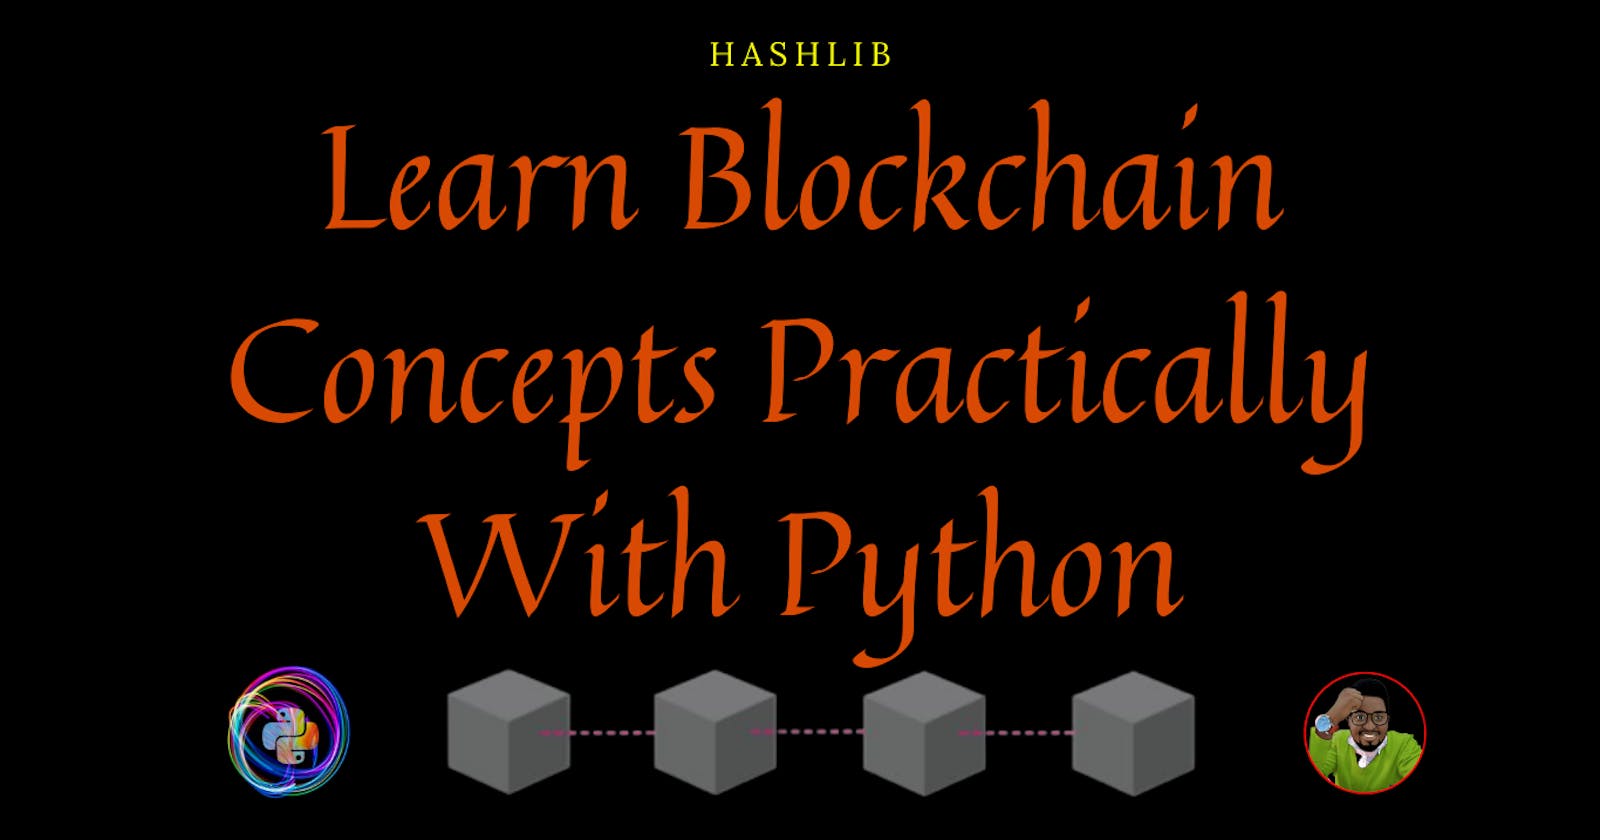 Learn Blockchain Concepts Practically With Python